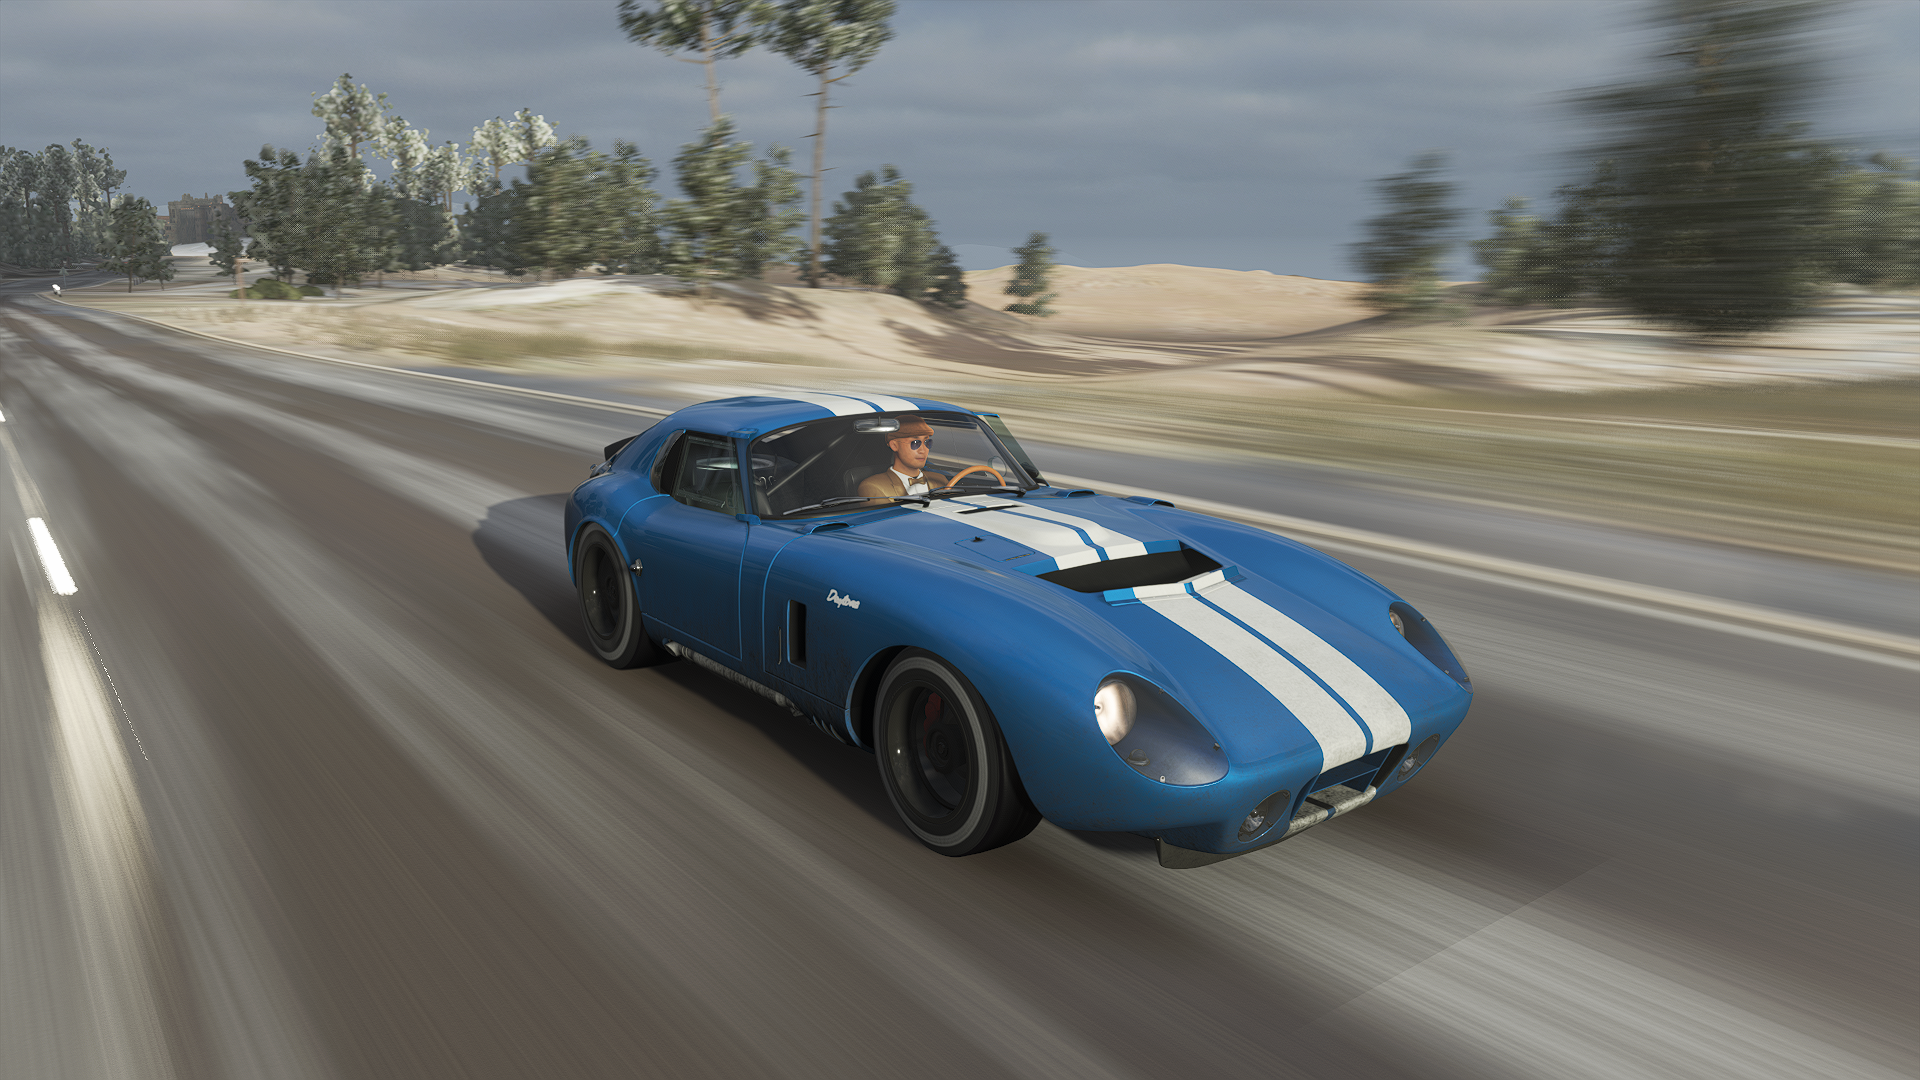 General 1920x1080 Forza Forza Horizon Forza Horizon 4 racing car Shelby Daytona video games road frontal view headlights blurred blurry background sky clouds trees